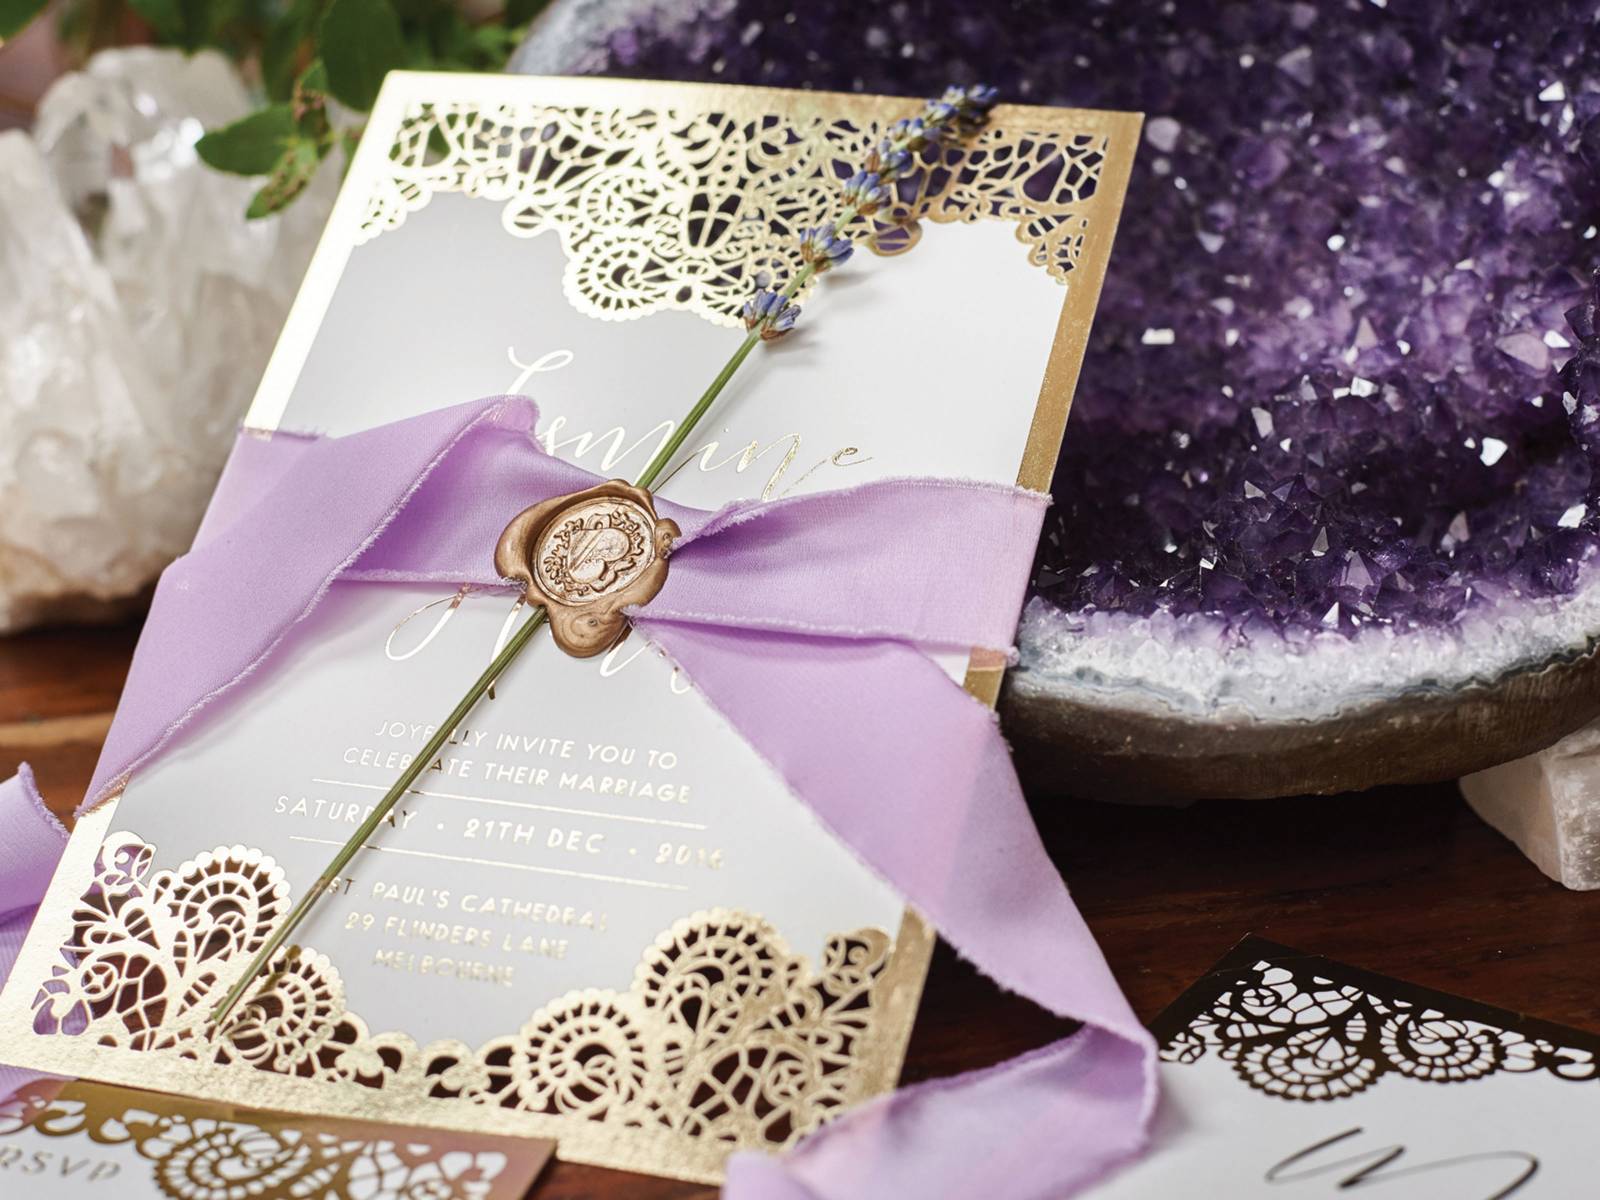 Elegant gold and white wedding invitation wrapped with lavender ribbon and stem of fresh lavender